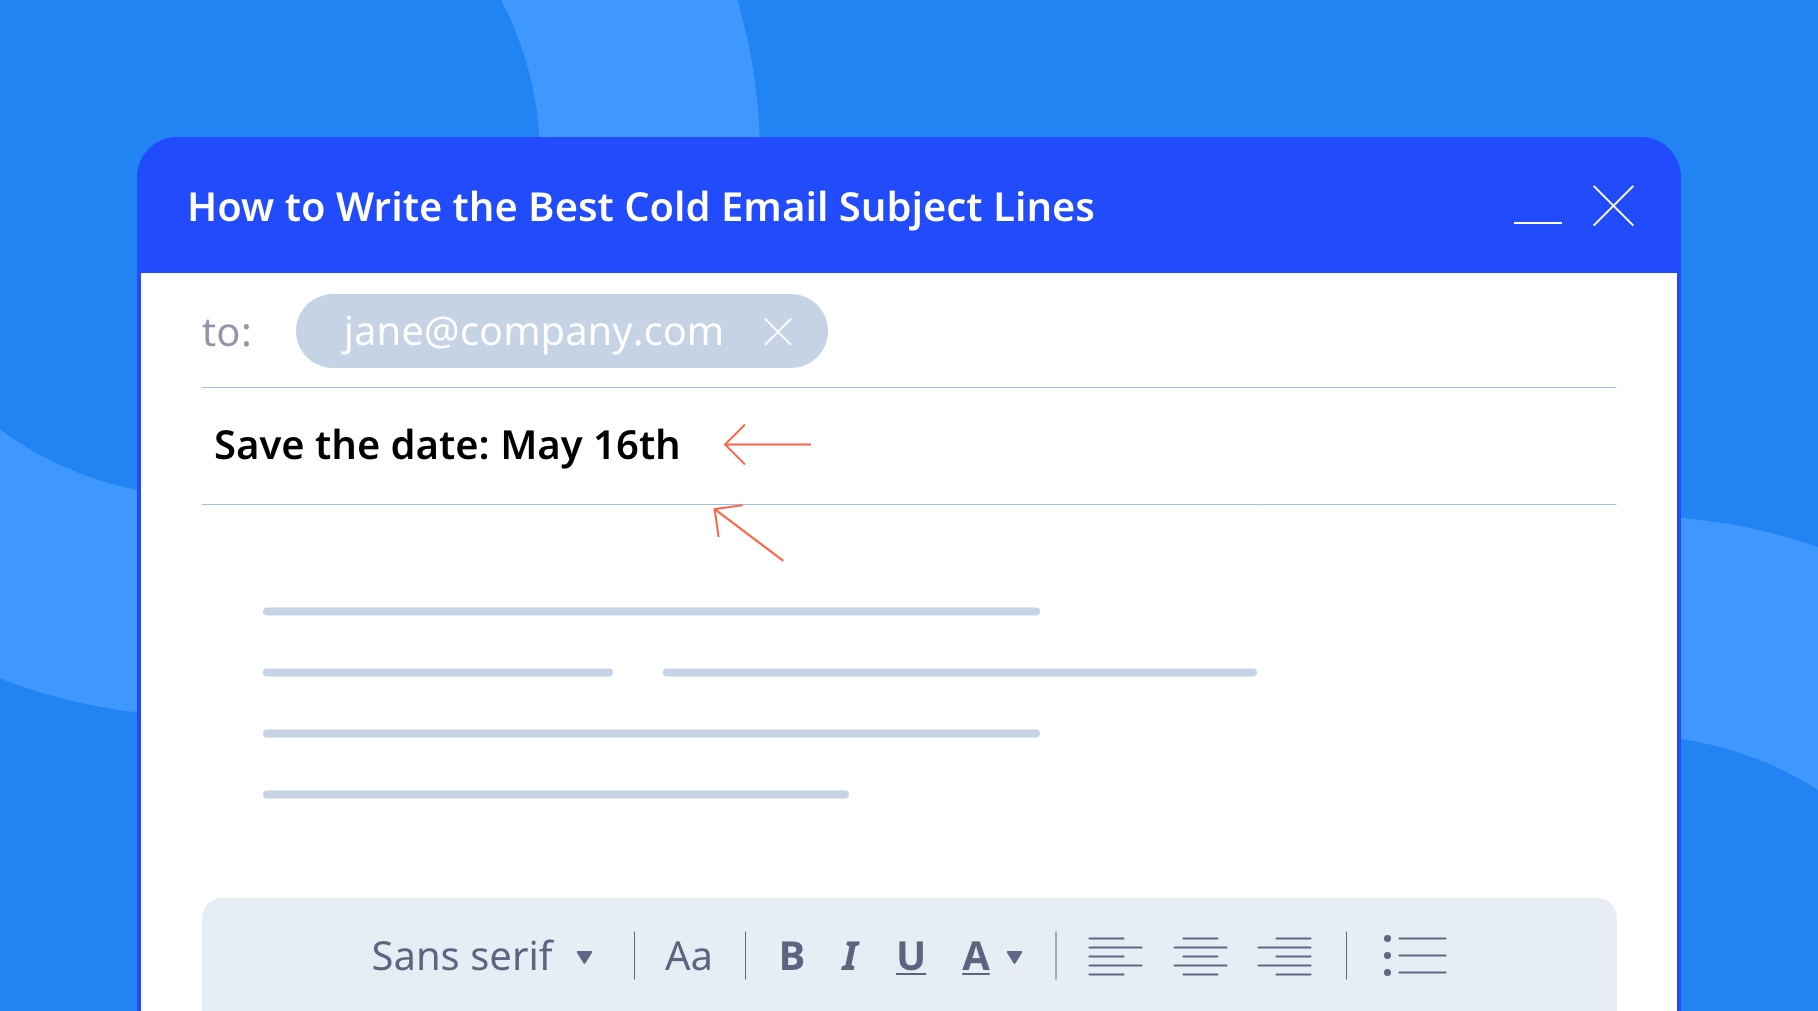 An email pop-up window with cold email subject line: "It's been a while".